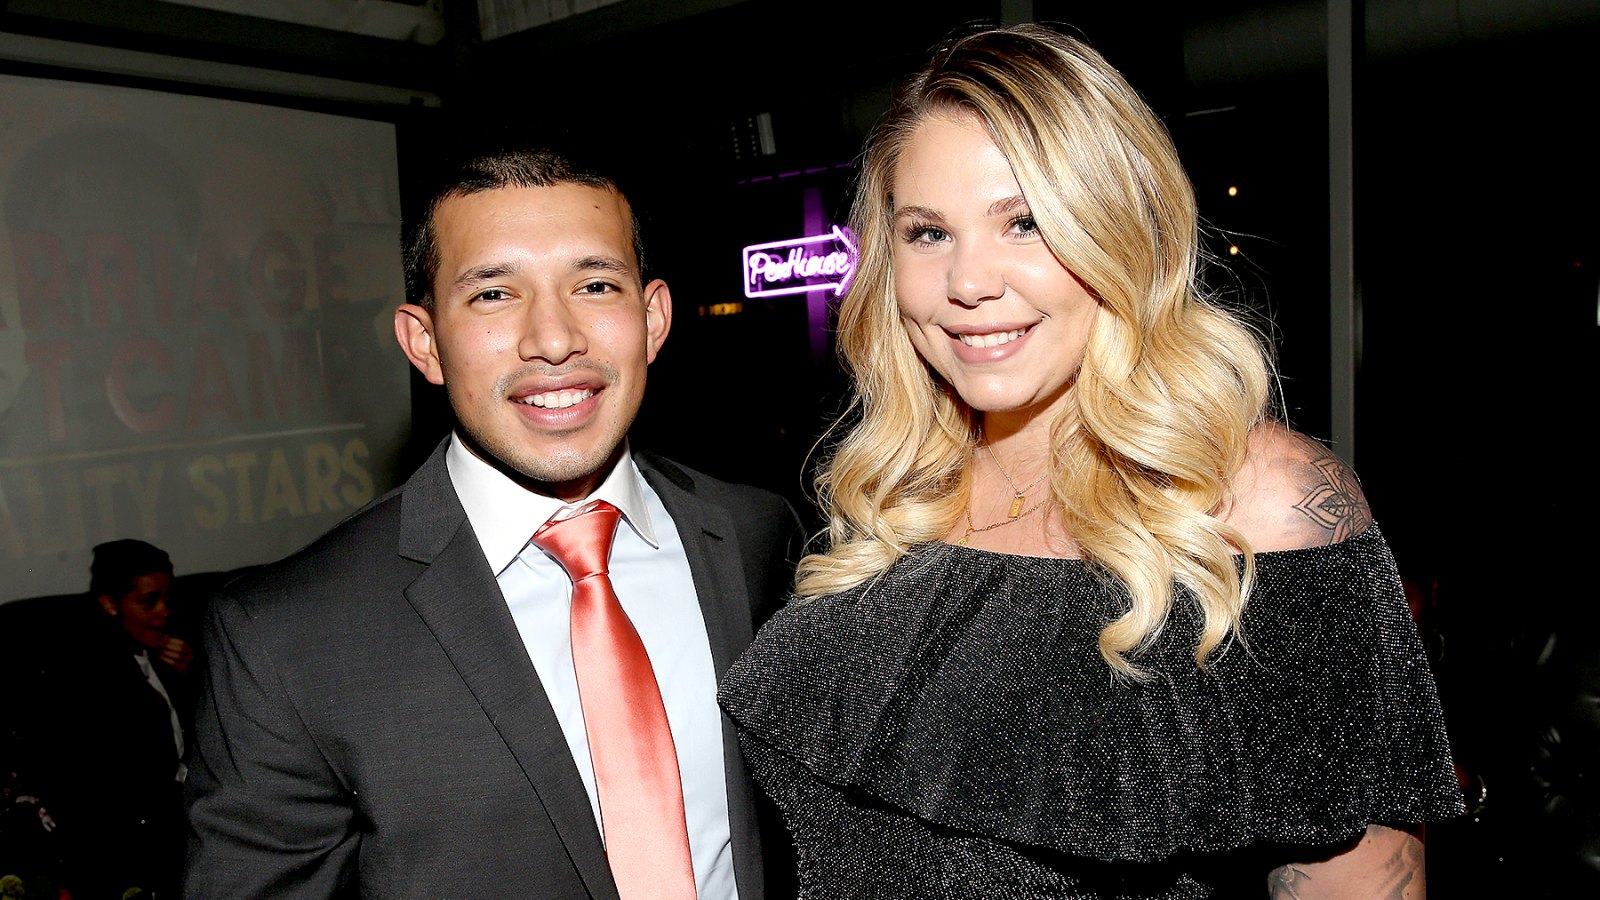 Javi-Marroquin-and-Kailyn-Lowry-cancel-tell-all-book